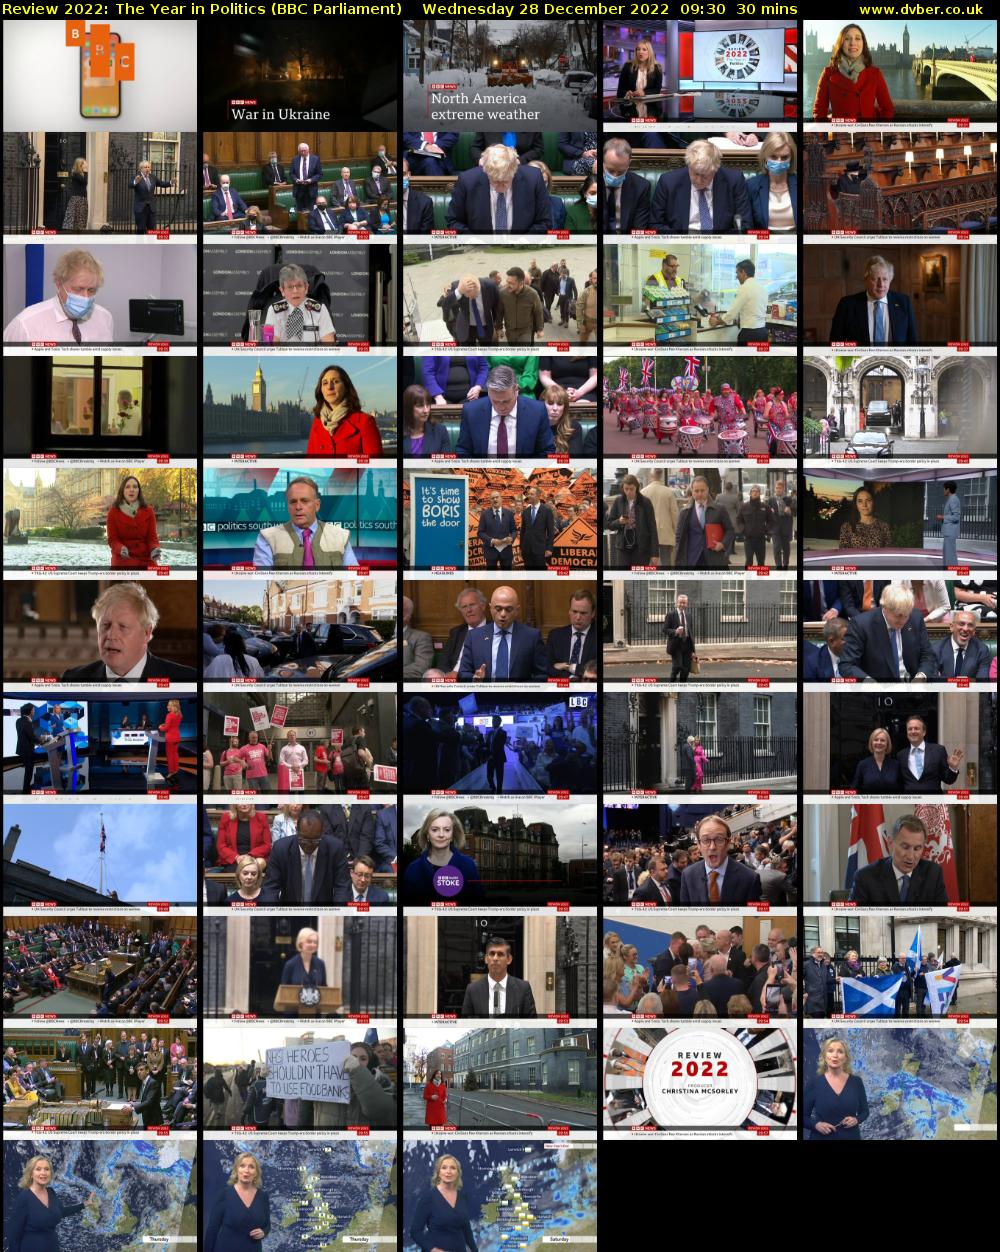 Review 2022: The Year in Politics (BBC Parliament) Wednesday 28 December 2022 09:30 - 10:00